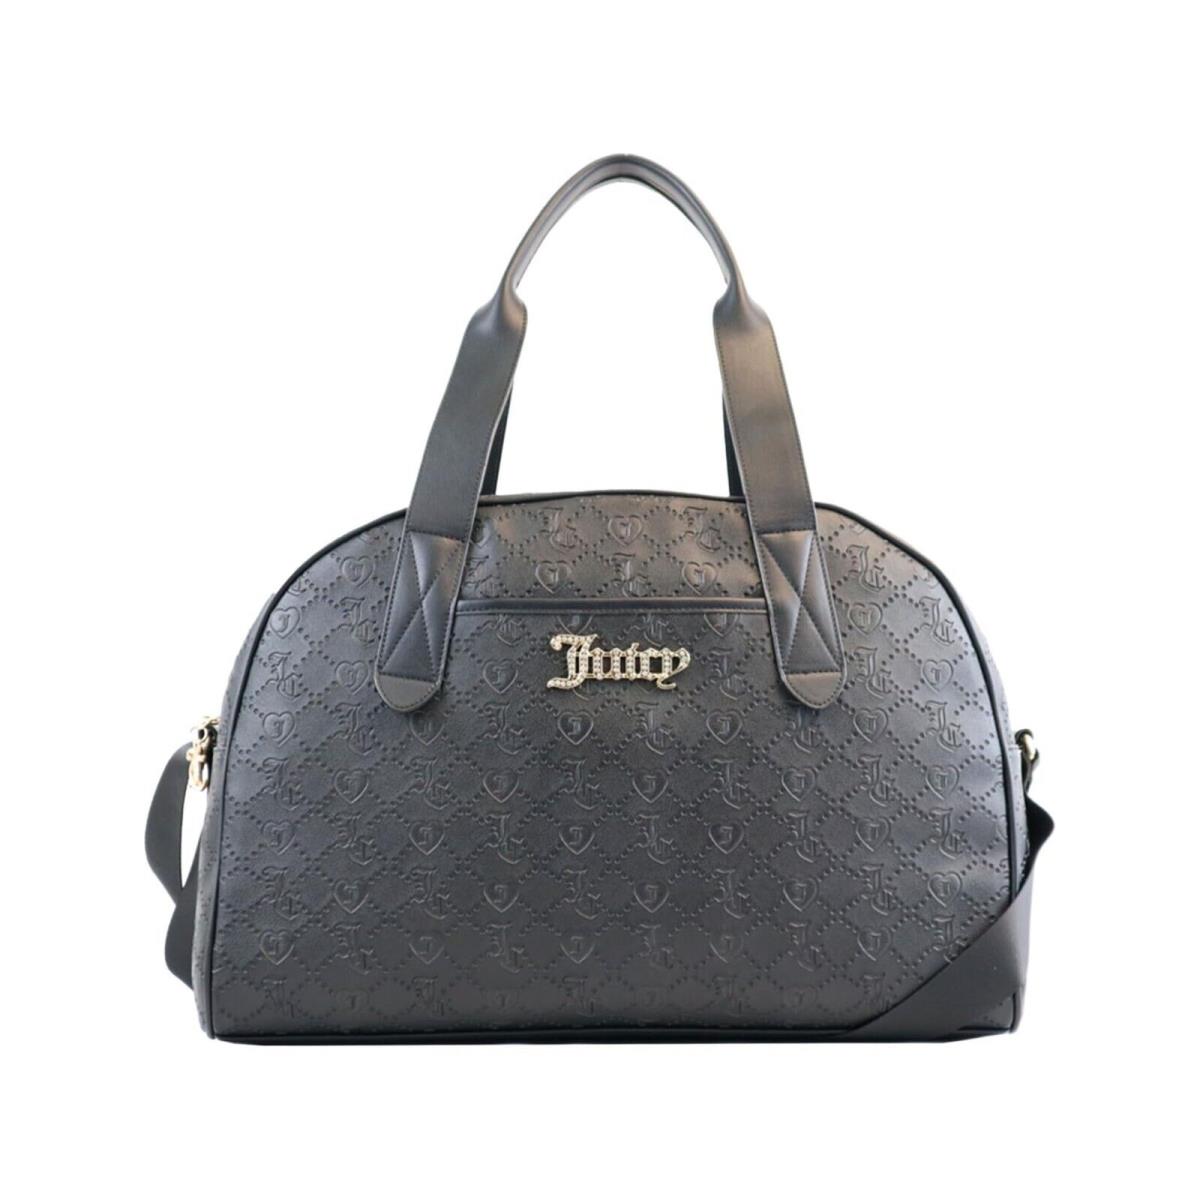 Juicy Couture Semi Charmed Weekender Duffle Bag Licorice - Handle/Strap: , Hardware: Gold, Exterior: